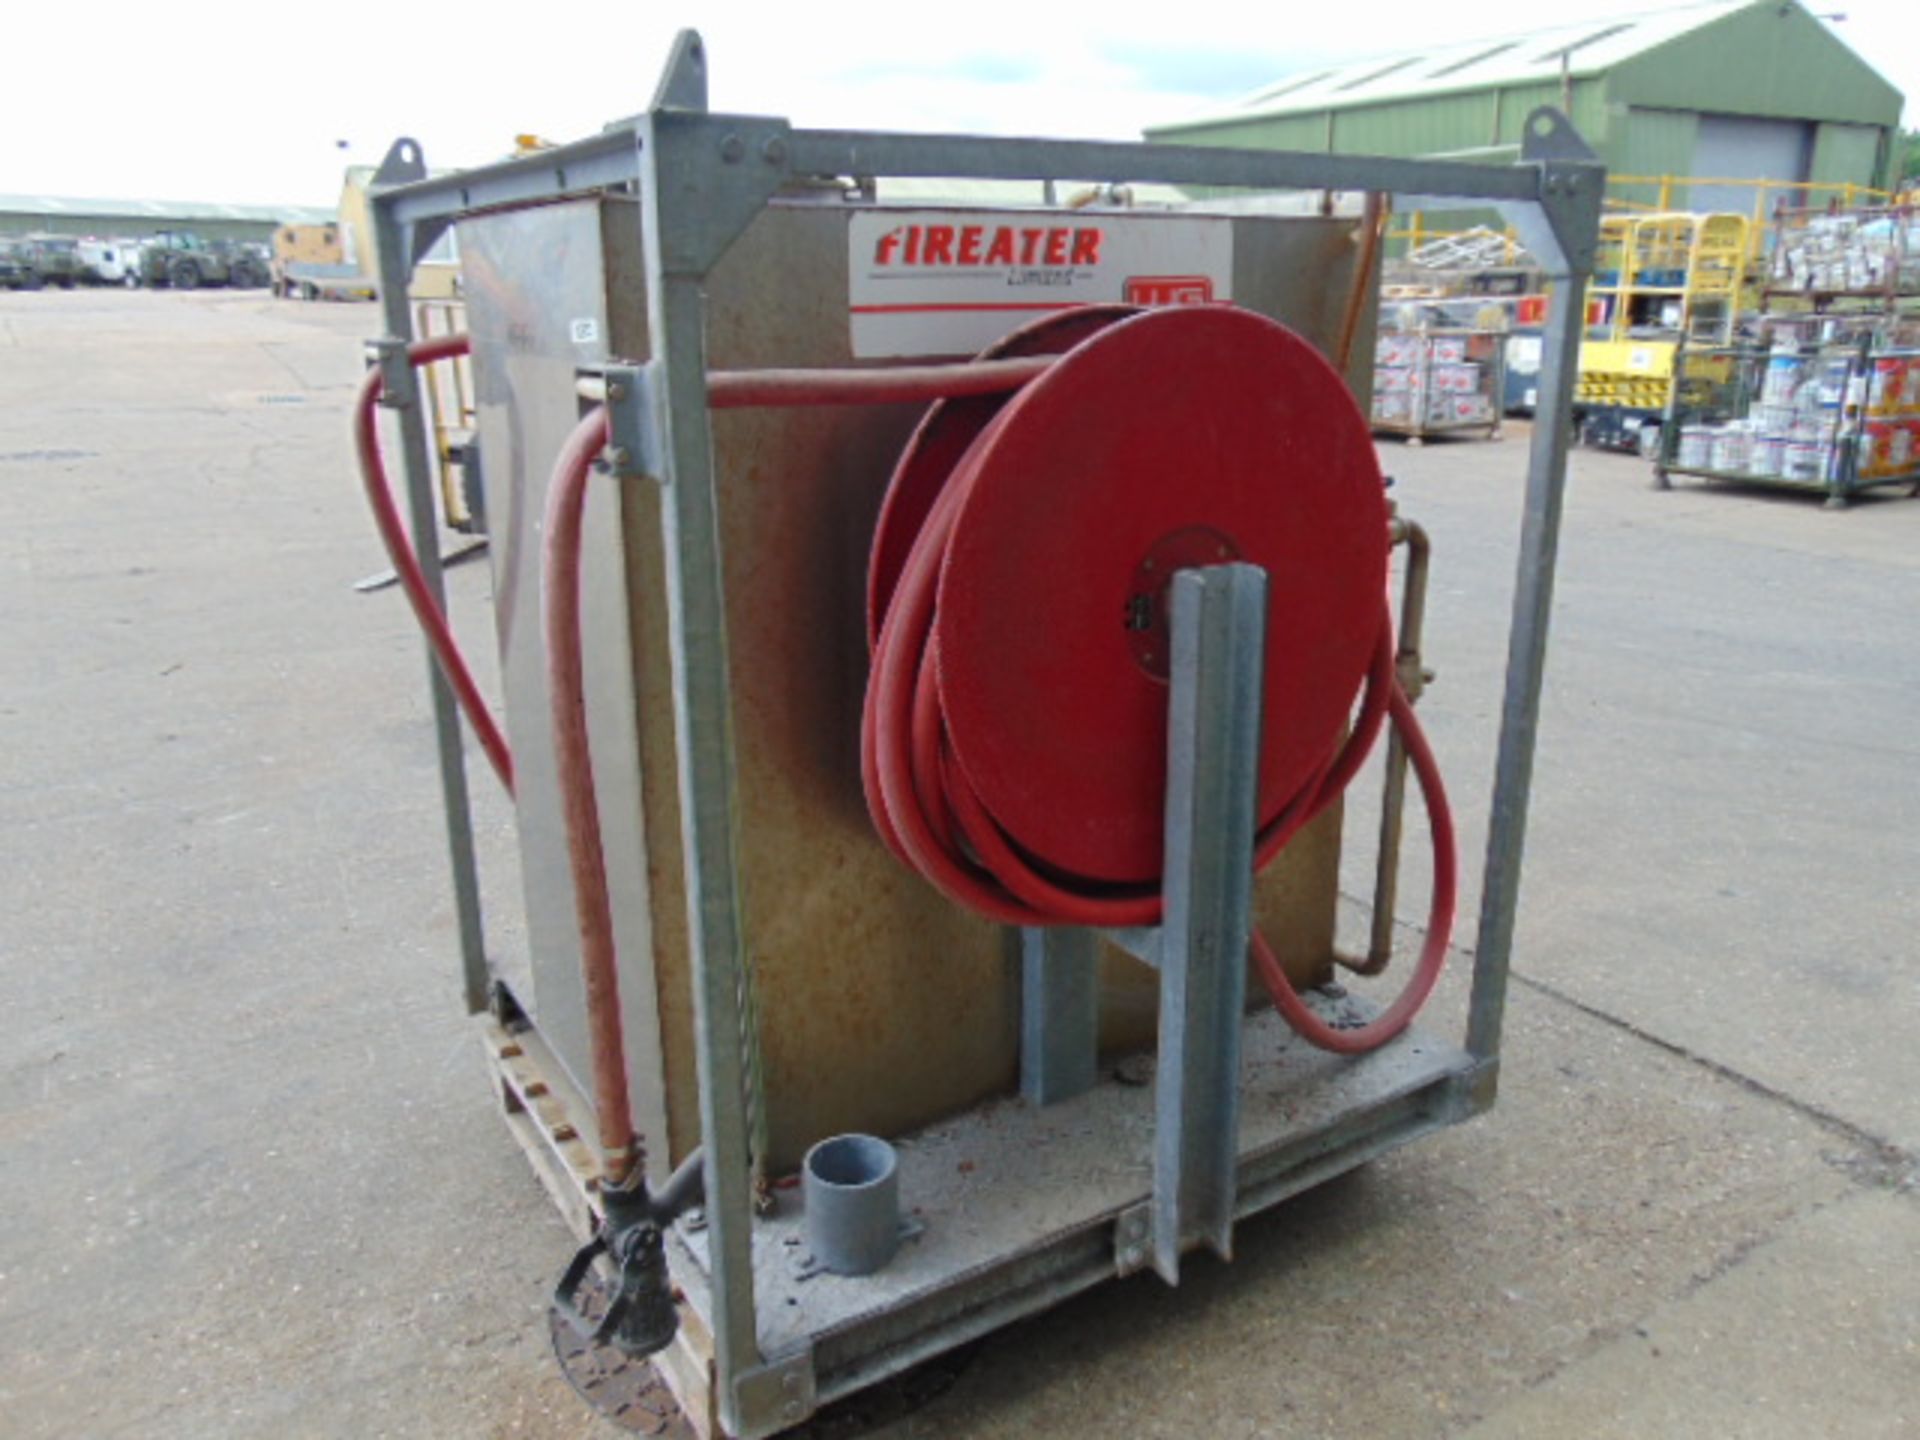 700L Fireater AFFF (Aqueous Film-Forming Foam) stainless steelTanks c/w 2 x 10m Fire Hose Reels. - Image 5 of 10